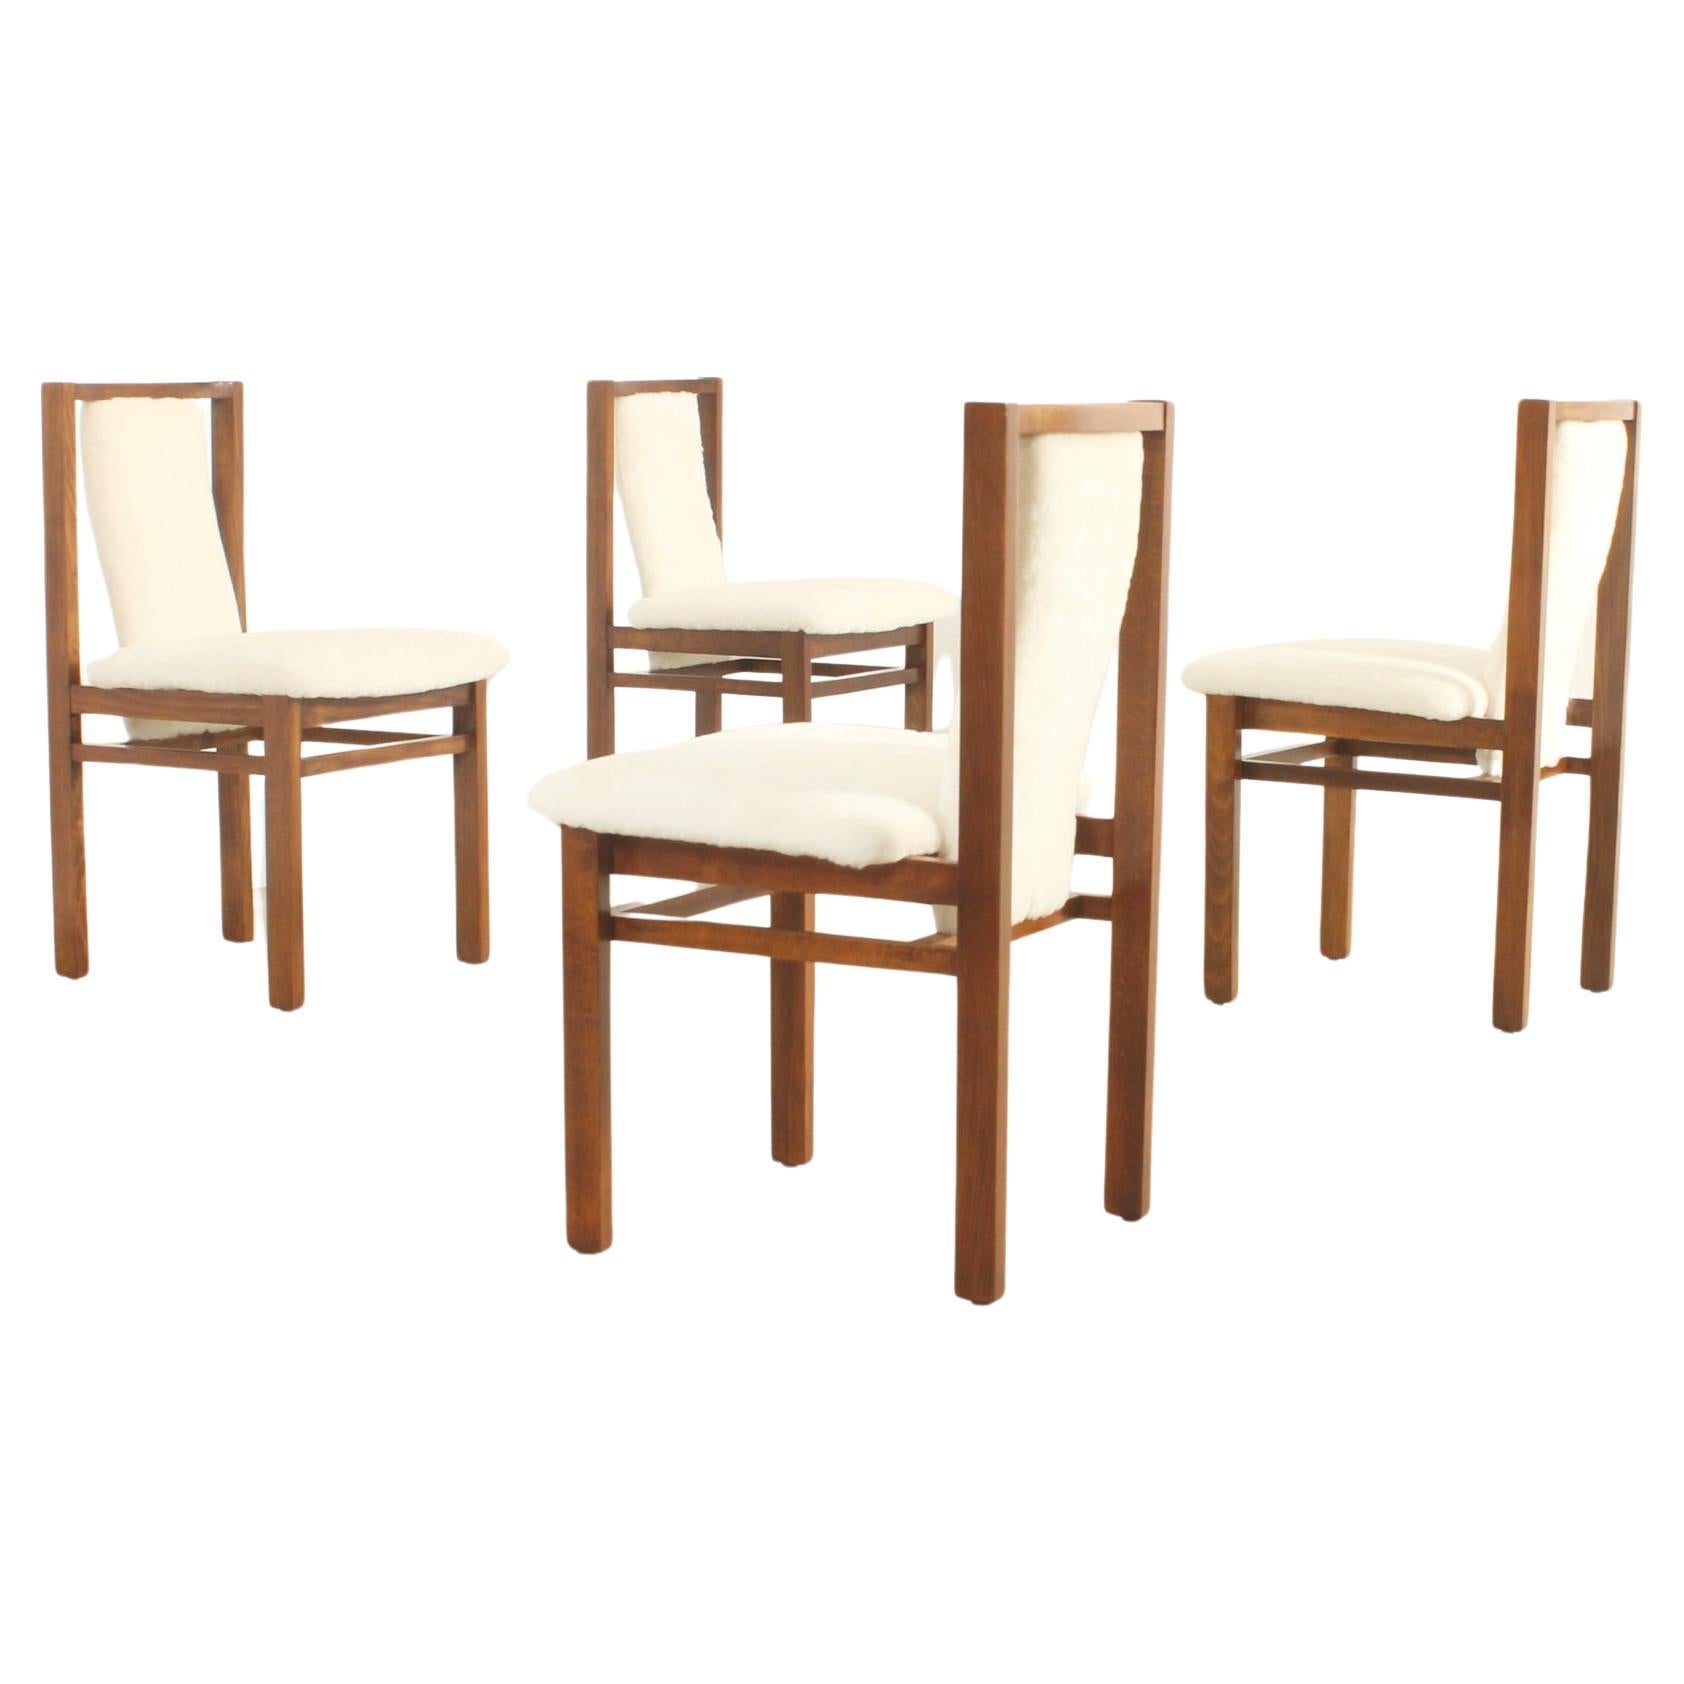 Four Dining Chairs by Jordi Vilanova in Oak Wood and Sheepskin, Spain, 1960's For Sale